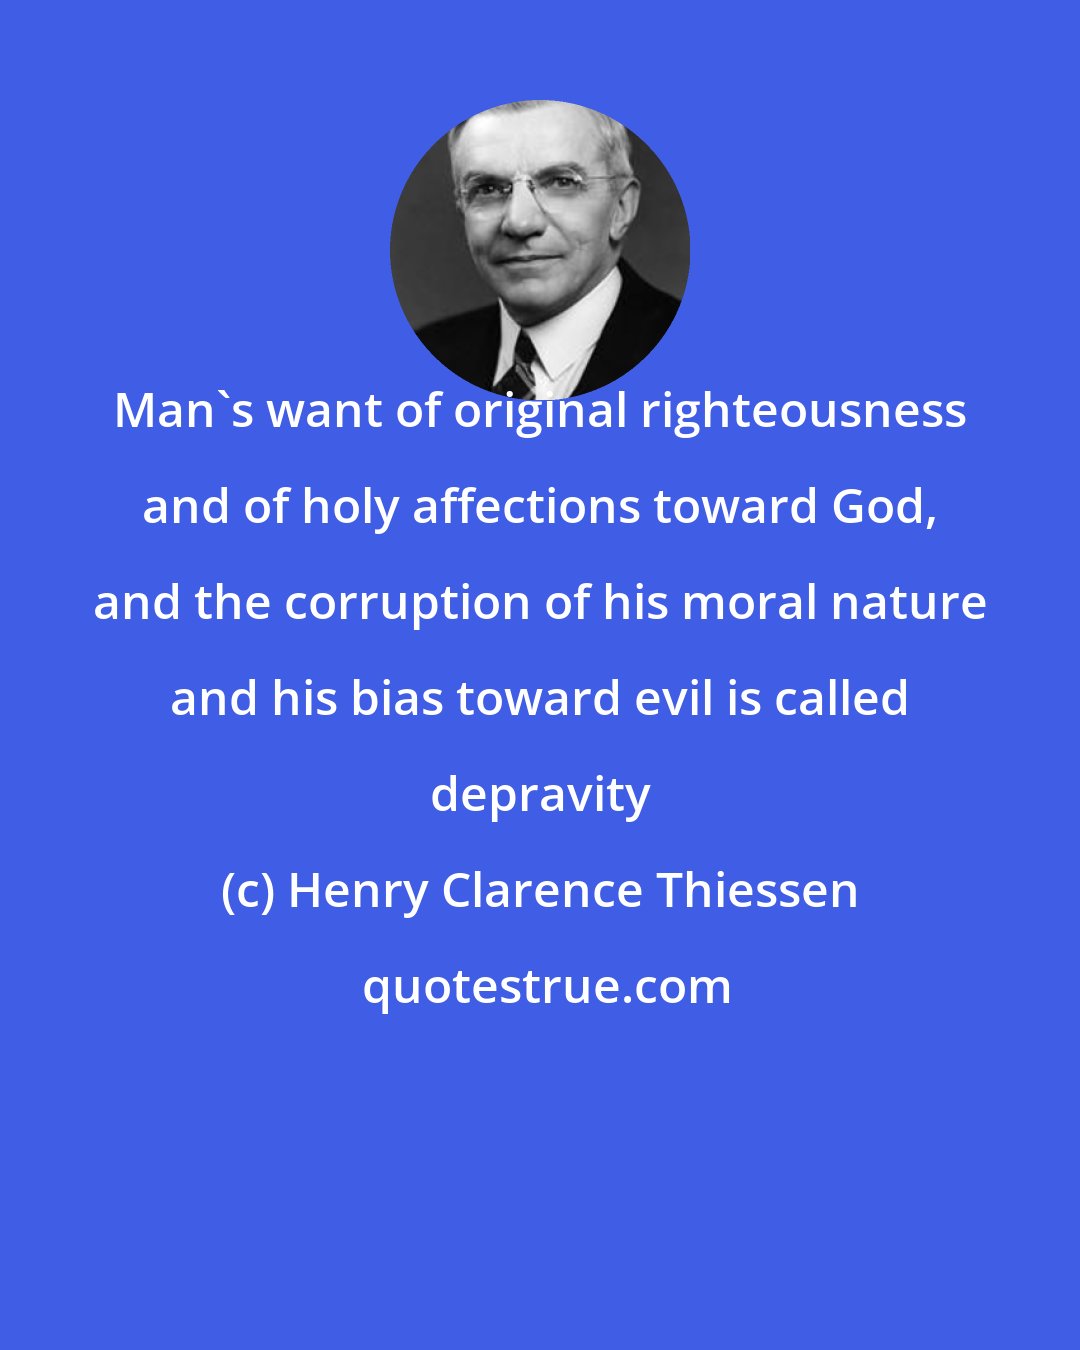 Henry Clarence Thiessen: Man's want of original righteousness and of holy affections toward God, and the corruption of his moral nature and his bias toward evil is called depravity